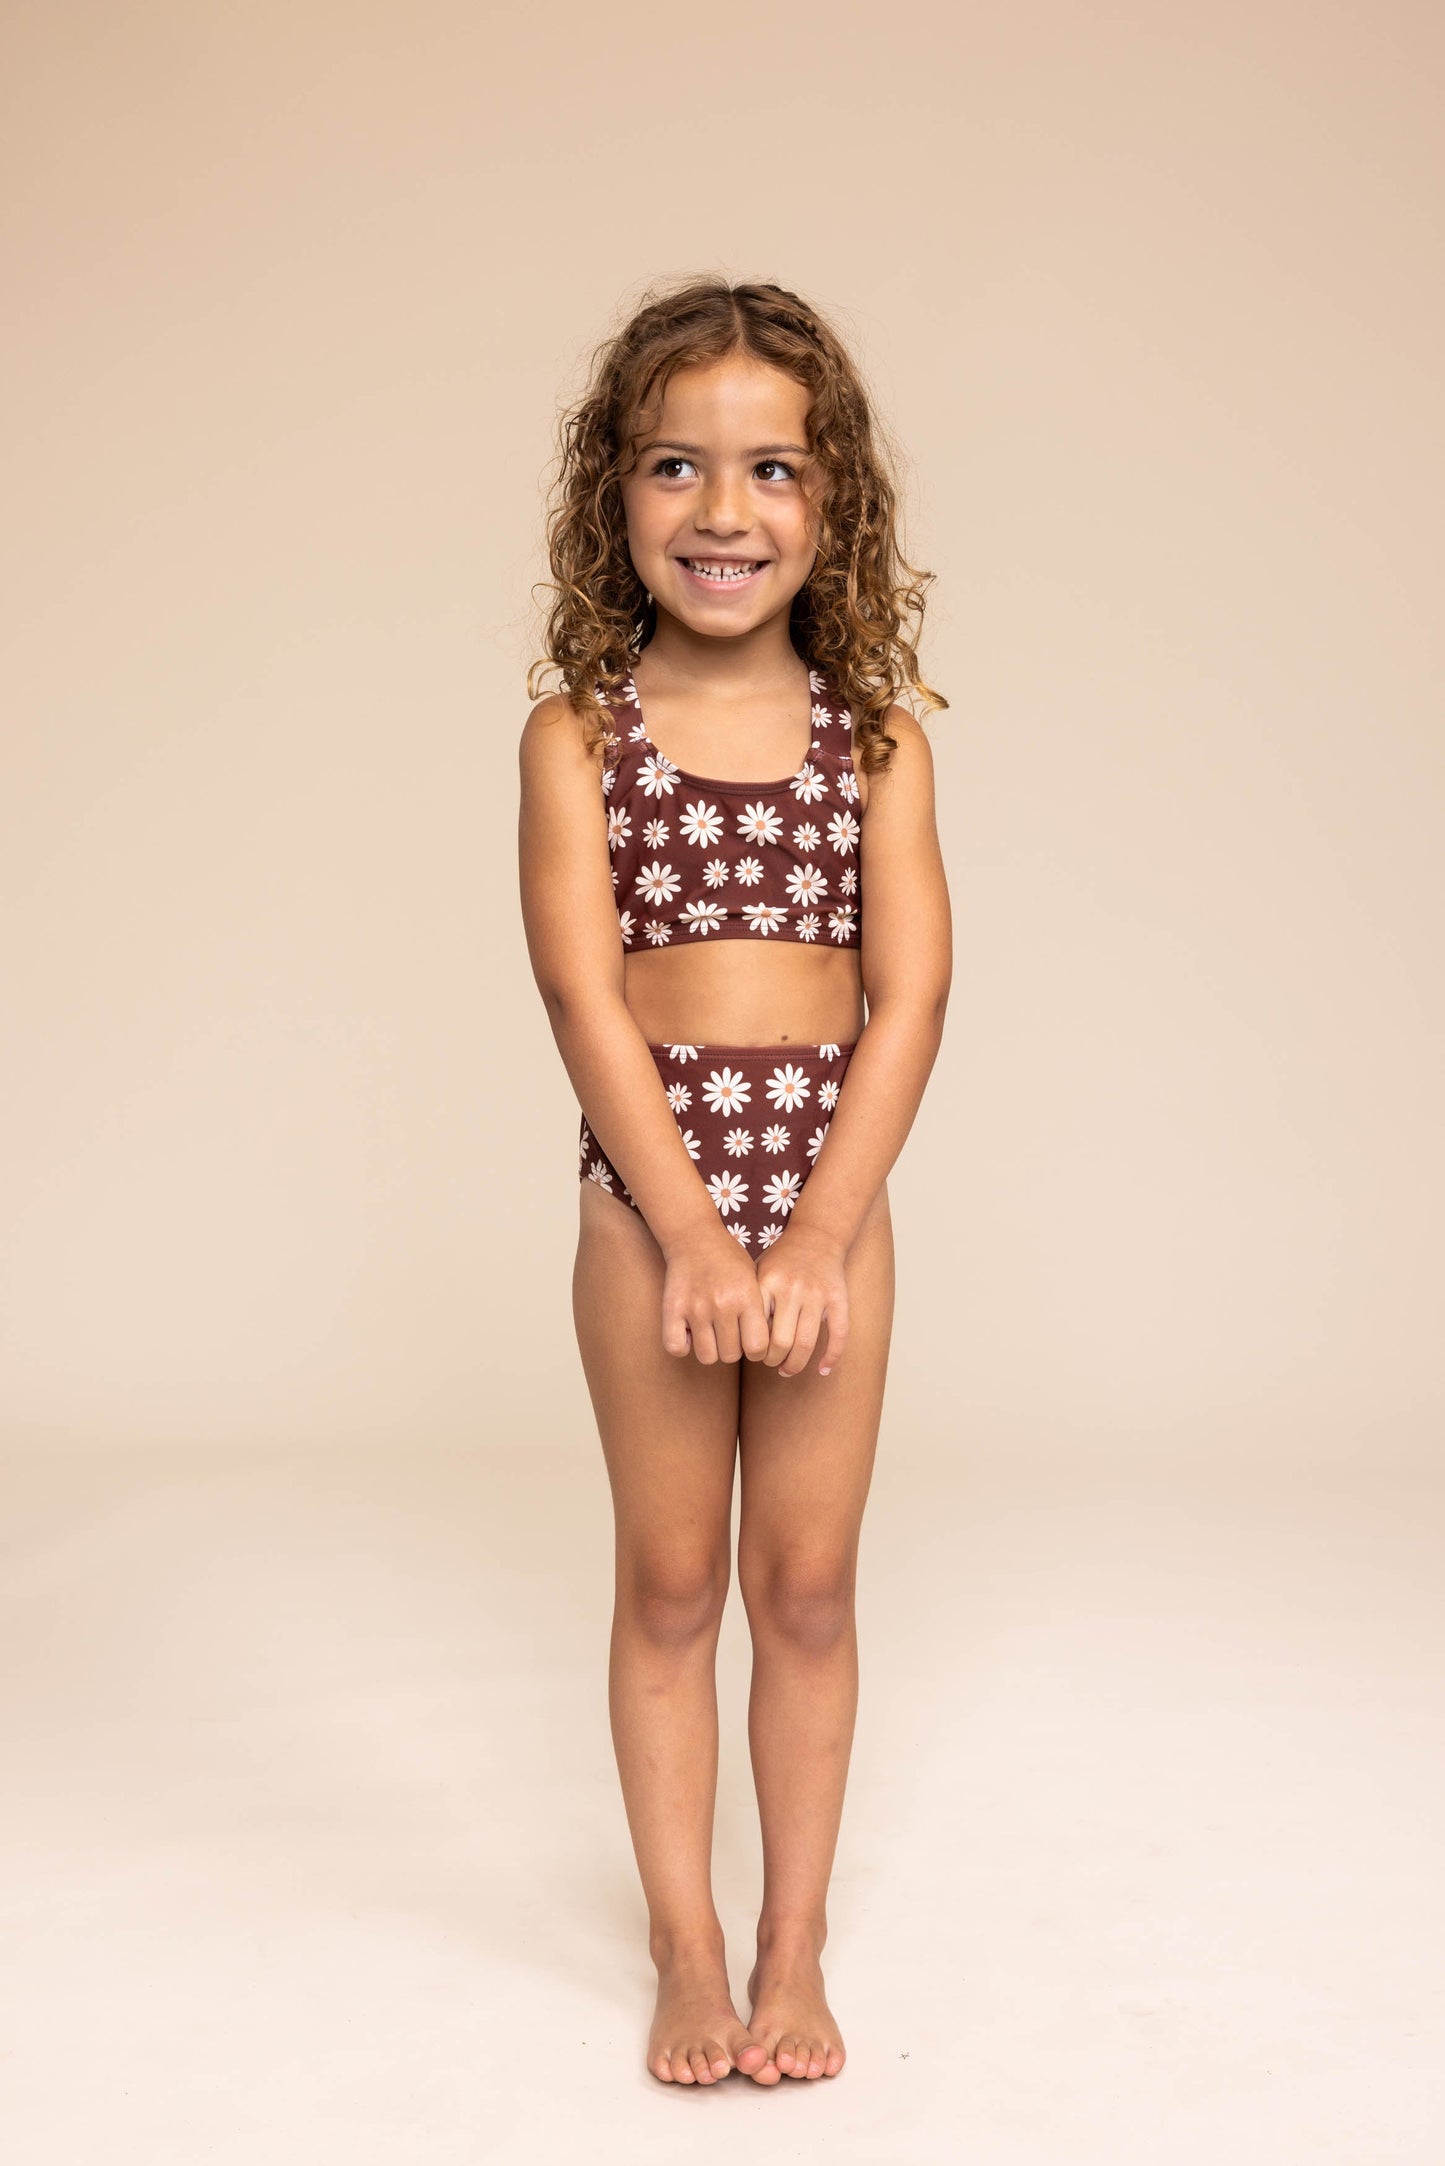 Brown daisy print 2pc swimsuit (size run small, go up 1-2 sizes)